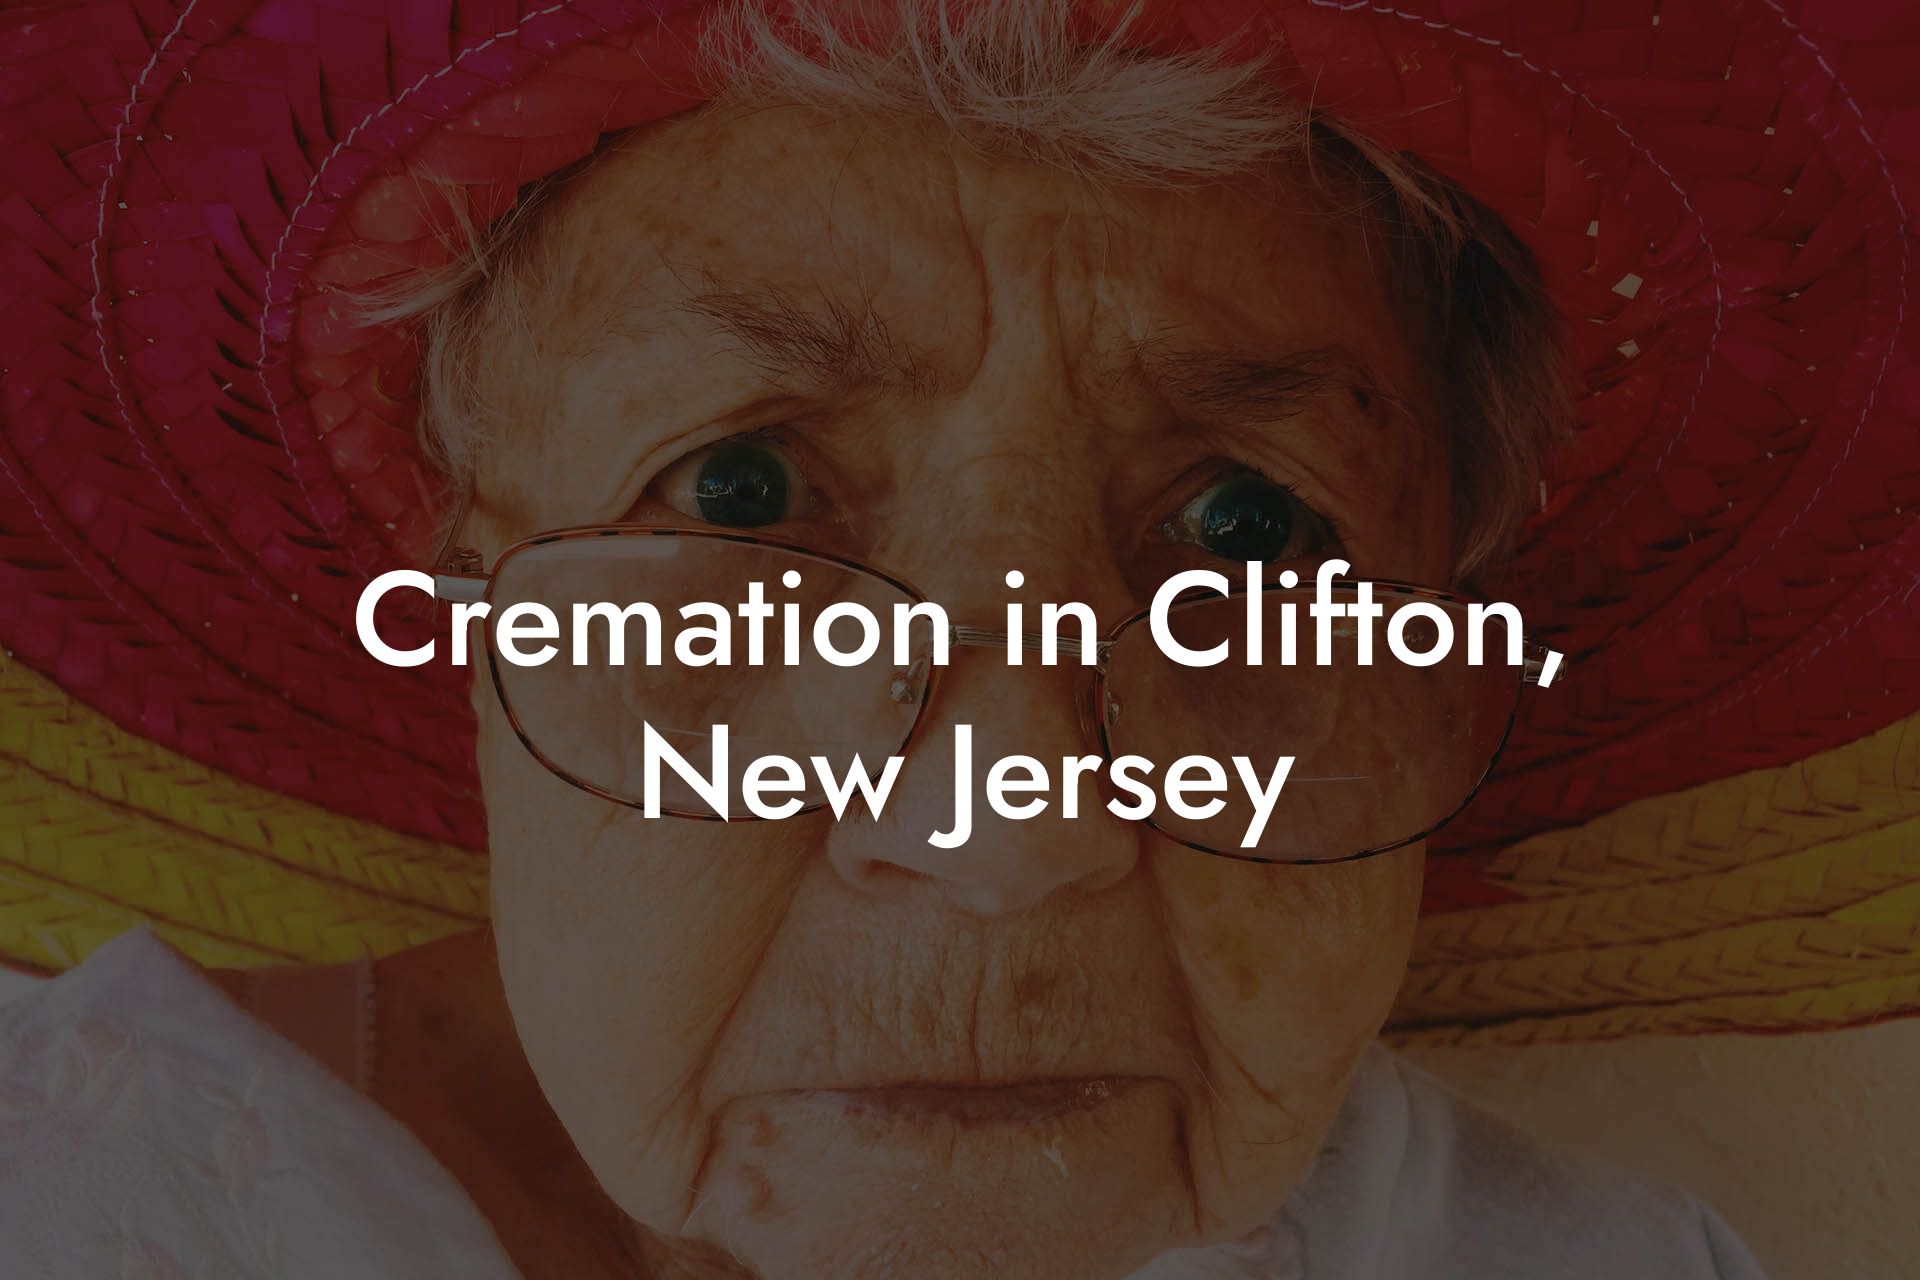 Cremation in Clifton, New Jersey